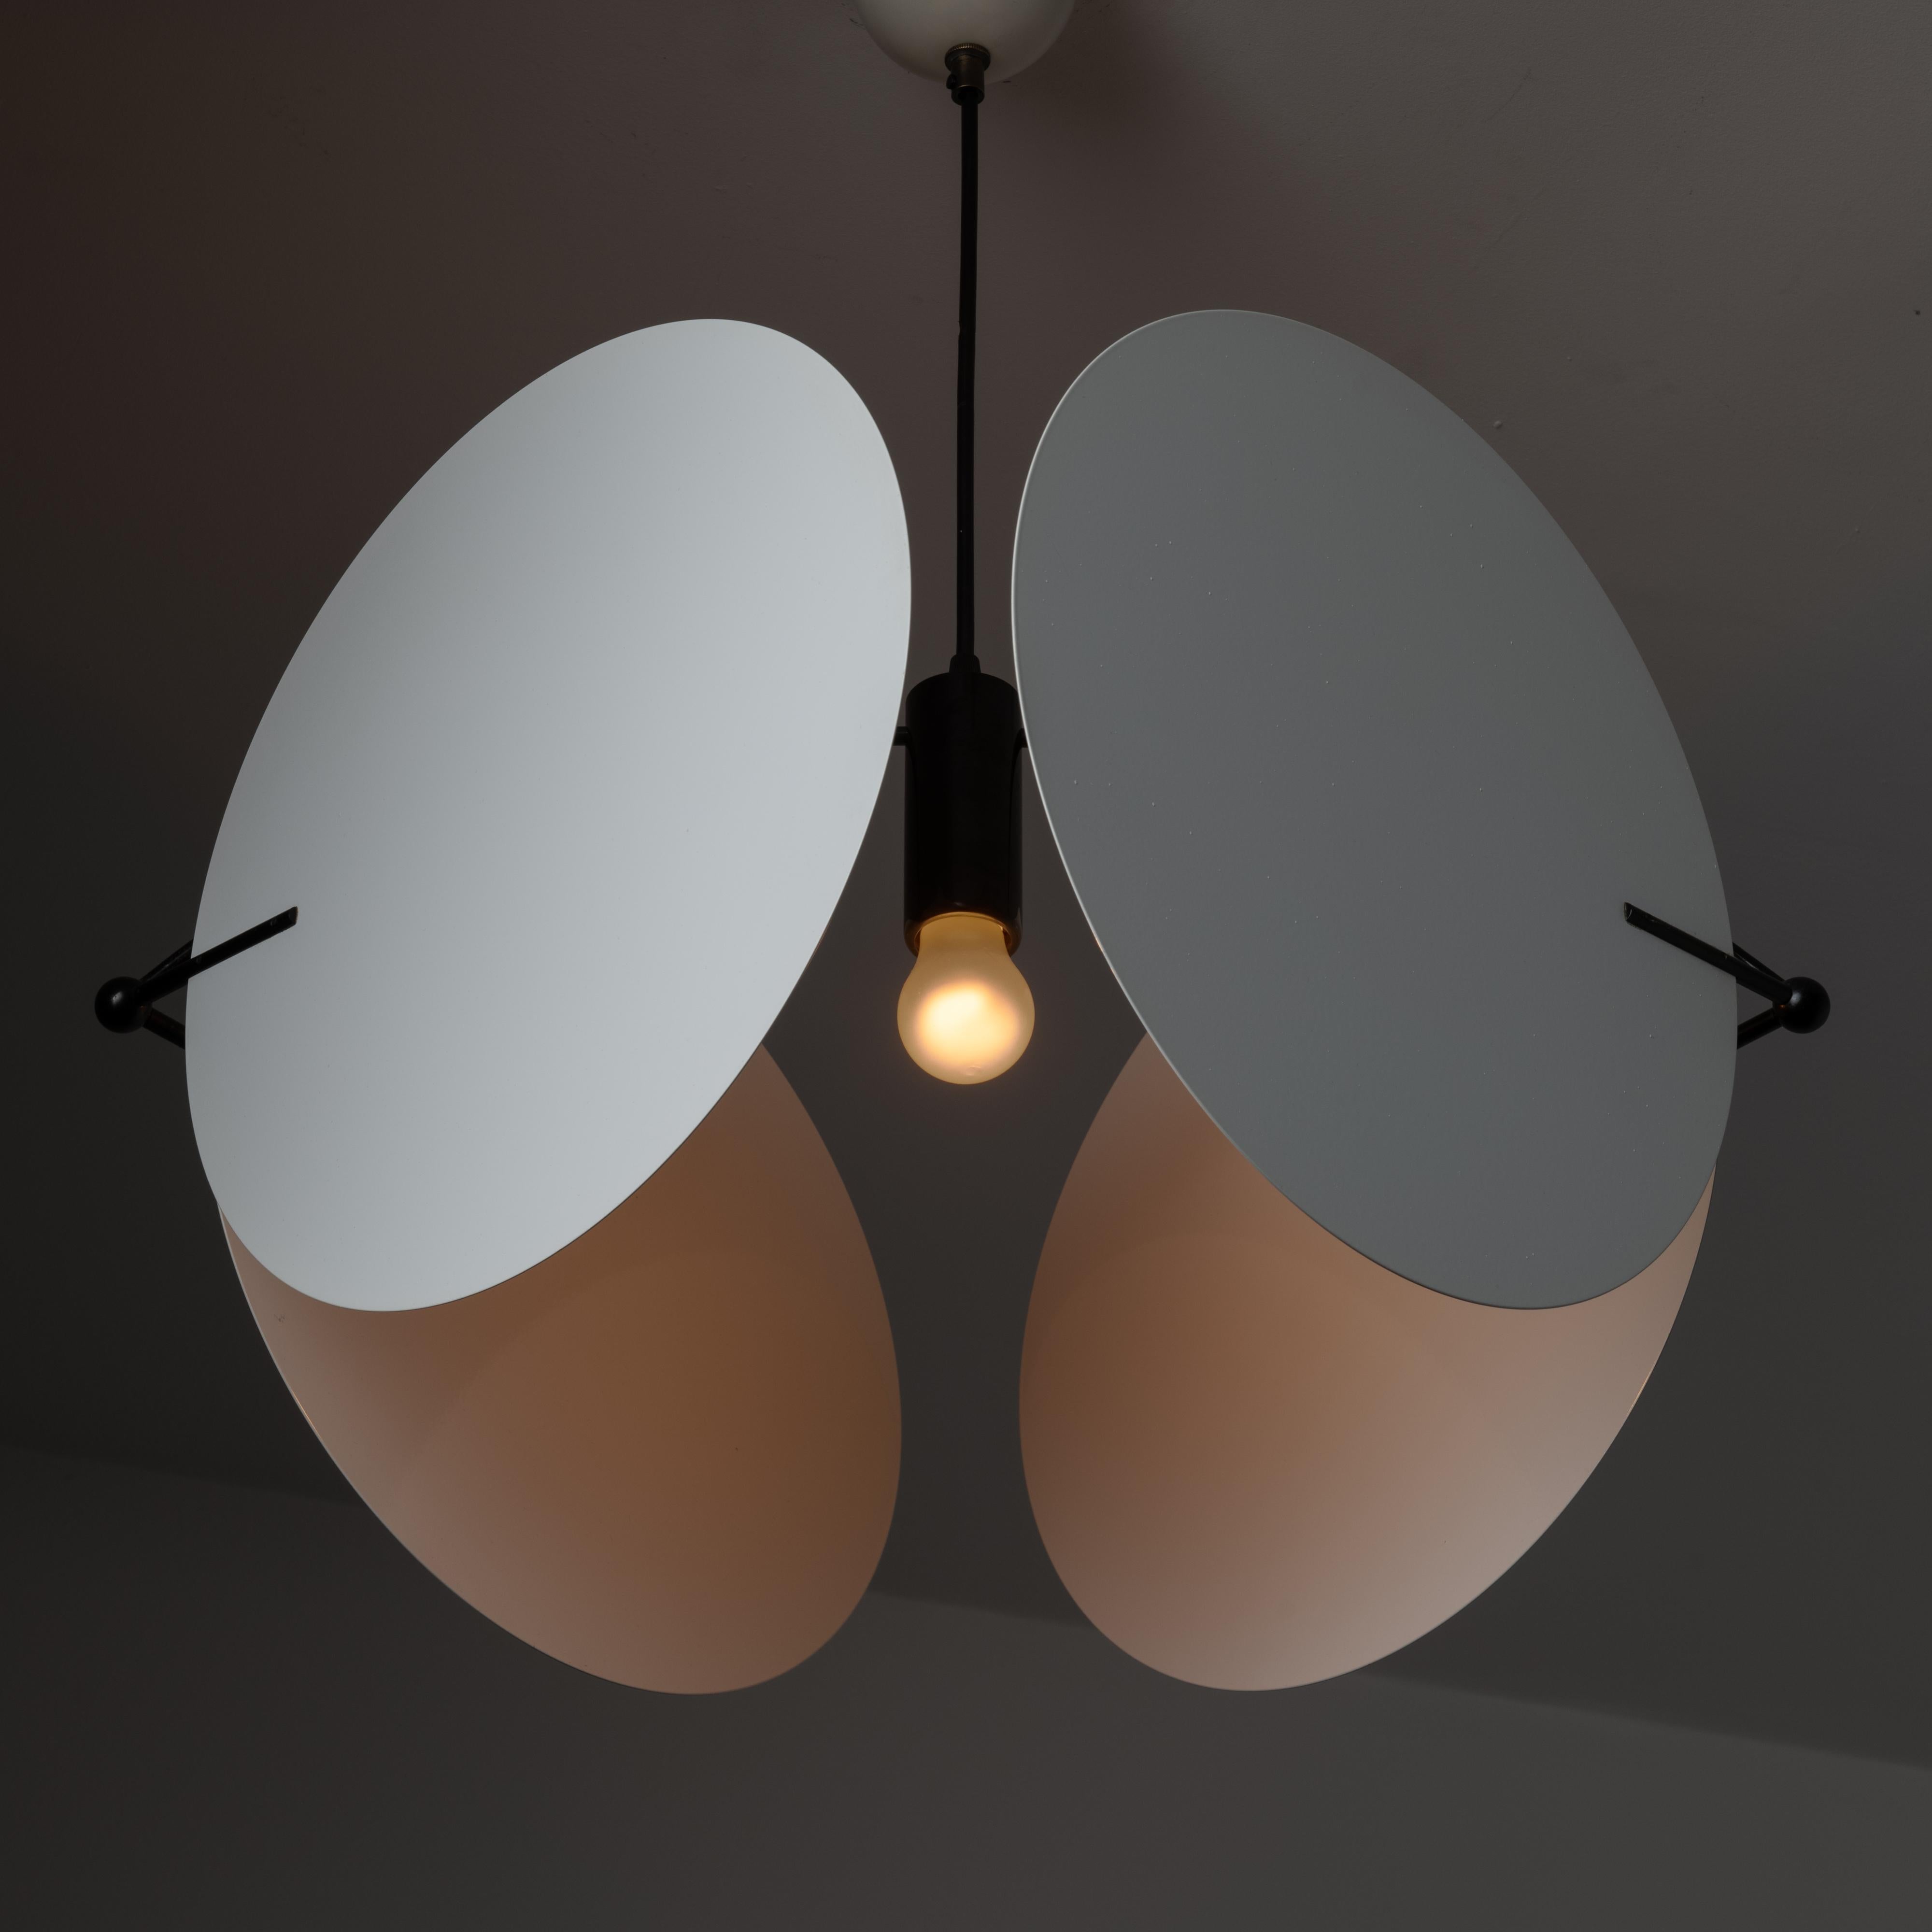 Model 460 'Monet' Ceiling Light by Vico Magistretti for Oluce. Designed and manufactured in Italy, circa the 1970s. A geometric contemporary pendant consisting of four flat circular shapes floating in perpendicular forms. All four panels are held by